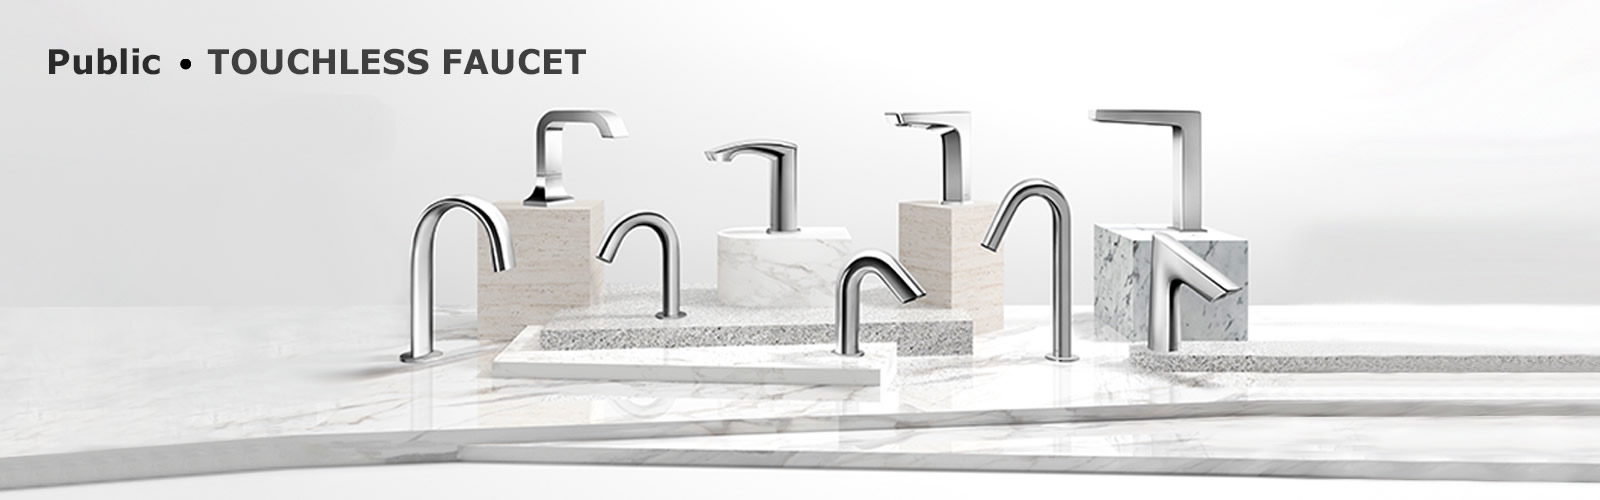 TOUCHLESS FAUCET